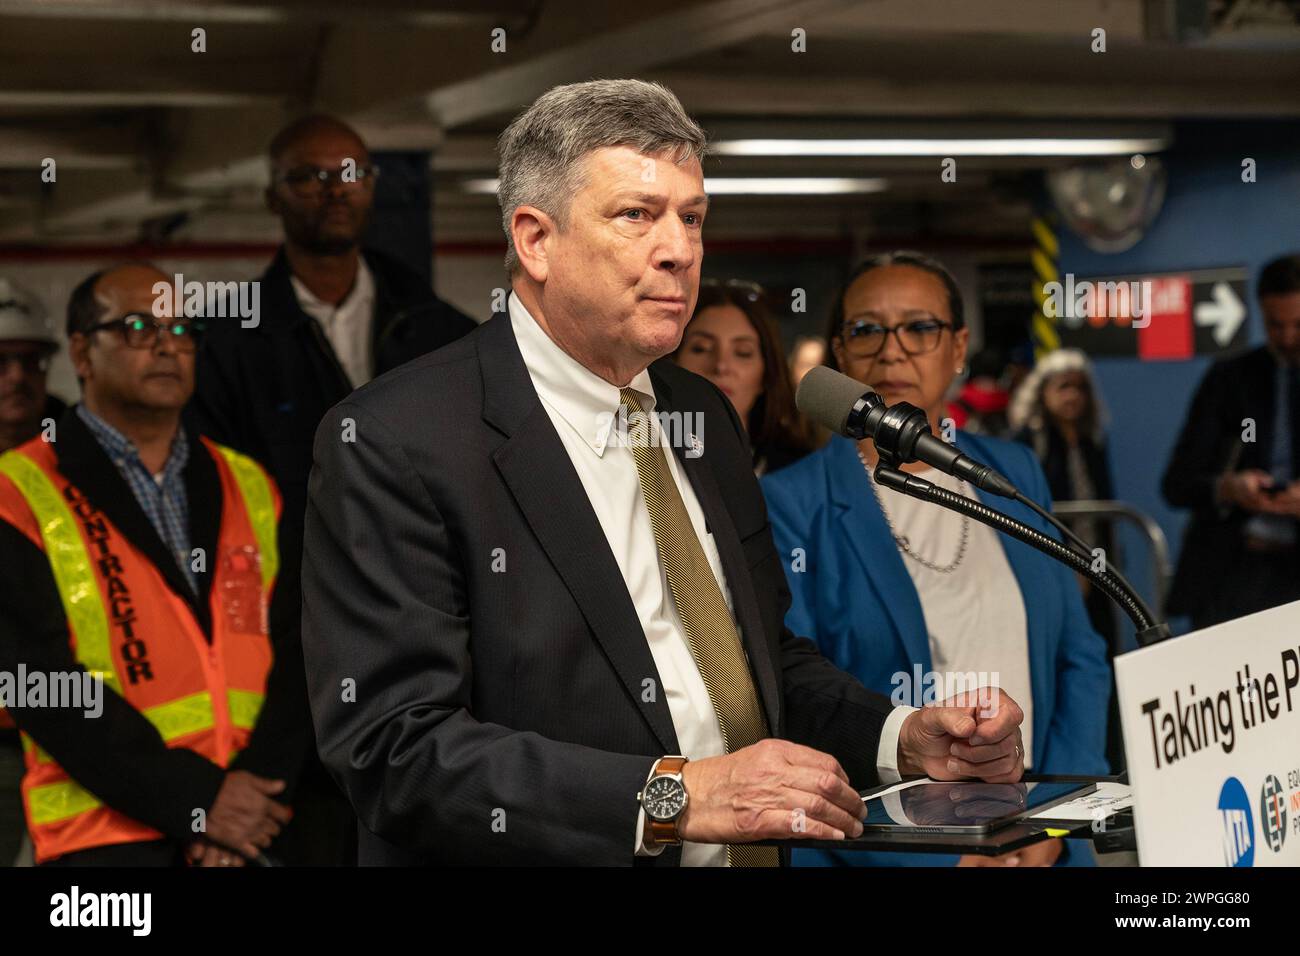 John Porcari, Equity in Infrastructure Project Co-Founder and Former U.S. Deputy Secretary of Transportation speaks during MTA announcement at 14th street subway station in New York on March 7, 2024. Dorval Carter Jr., Chicago Transit Authority President and Equity in Infrastructure Project Co-Chair, John Porcari, Equity in Infrastructure Project Co-Founder and Former U.S. Deputy Secretary of Transportation, Phillip Washington, Denver International Airport CEO and Equity in Infrastructure Project Chair, Janno Lieber, MTA Chair and CEO signed a pledge to promote minorities and women owned busin Stock Photo